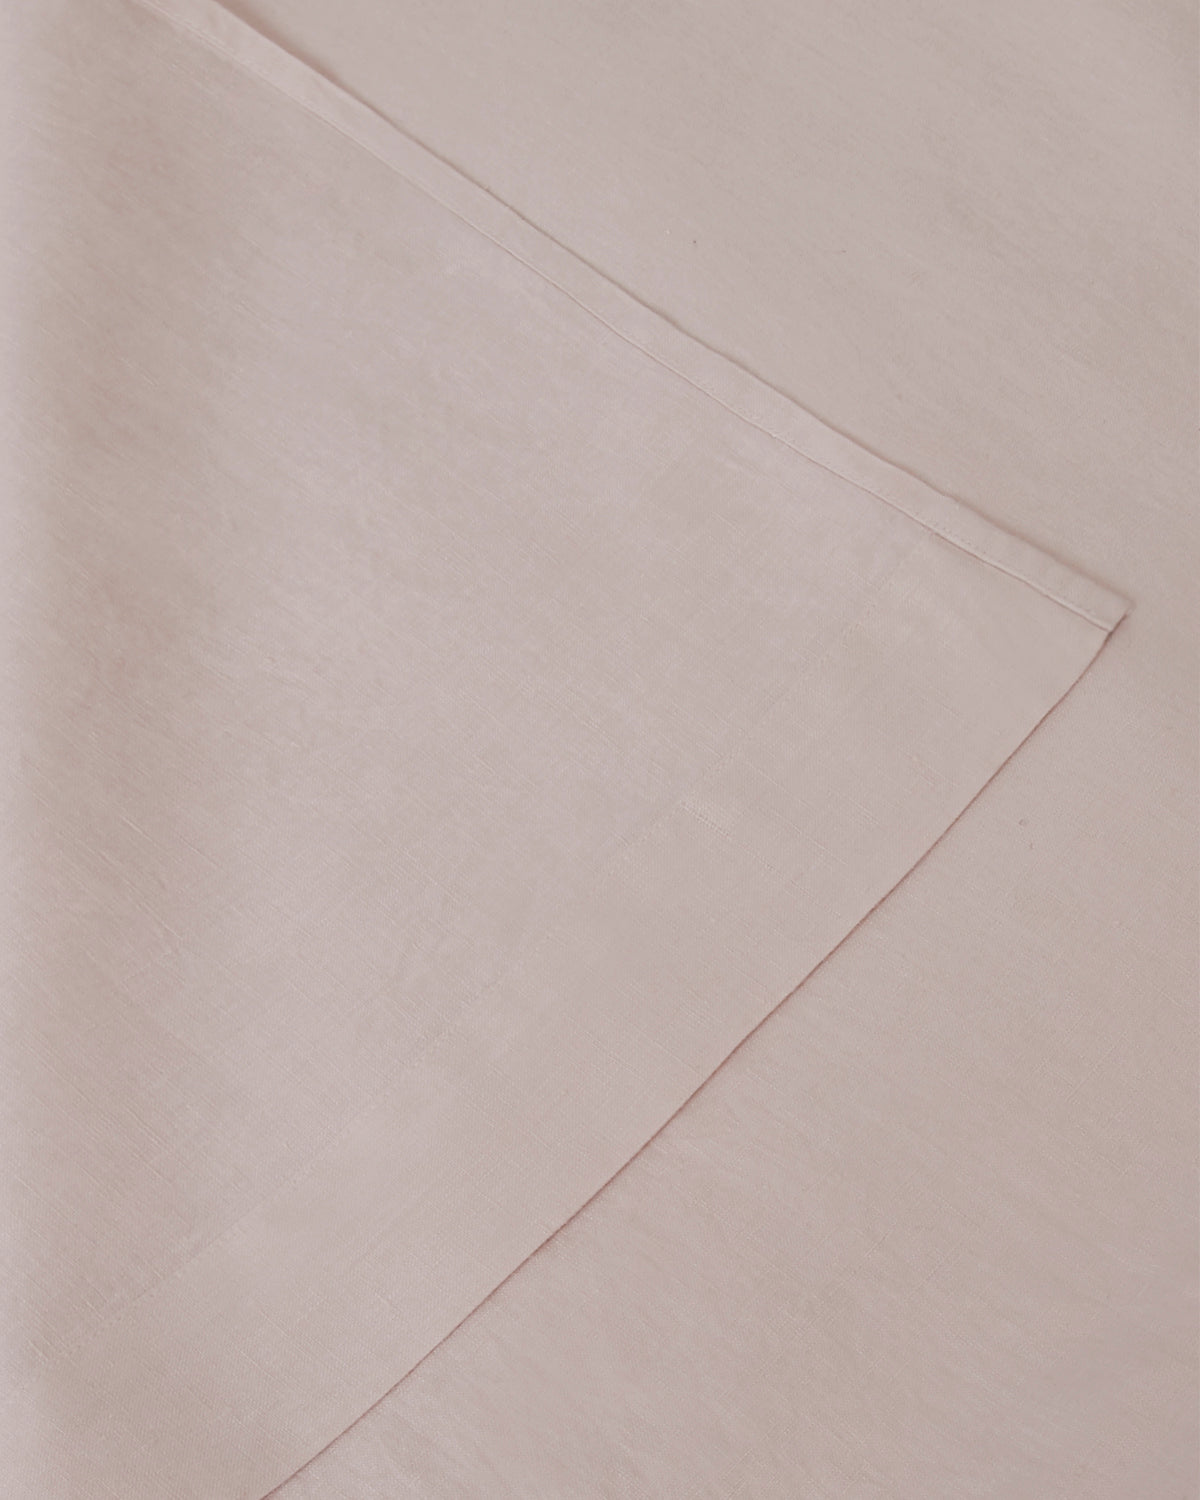 Linen sheets collection set in a light blush pink color